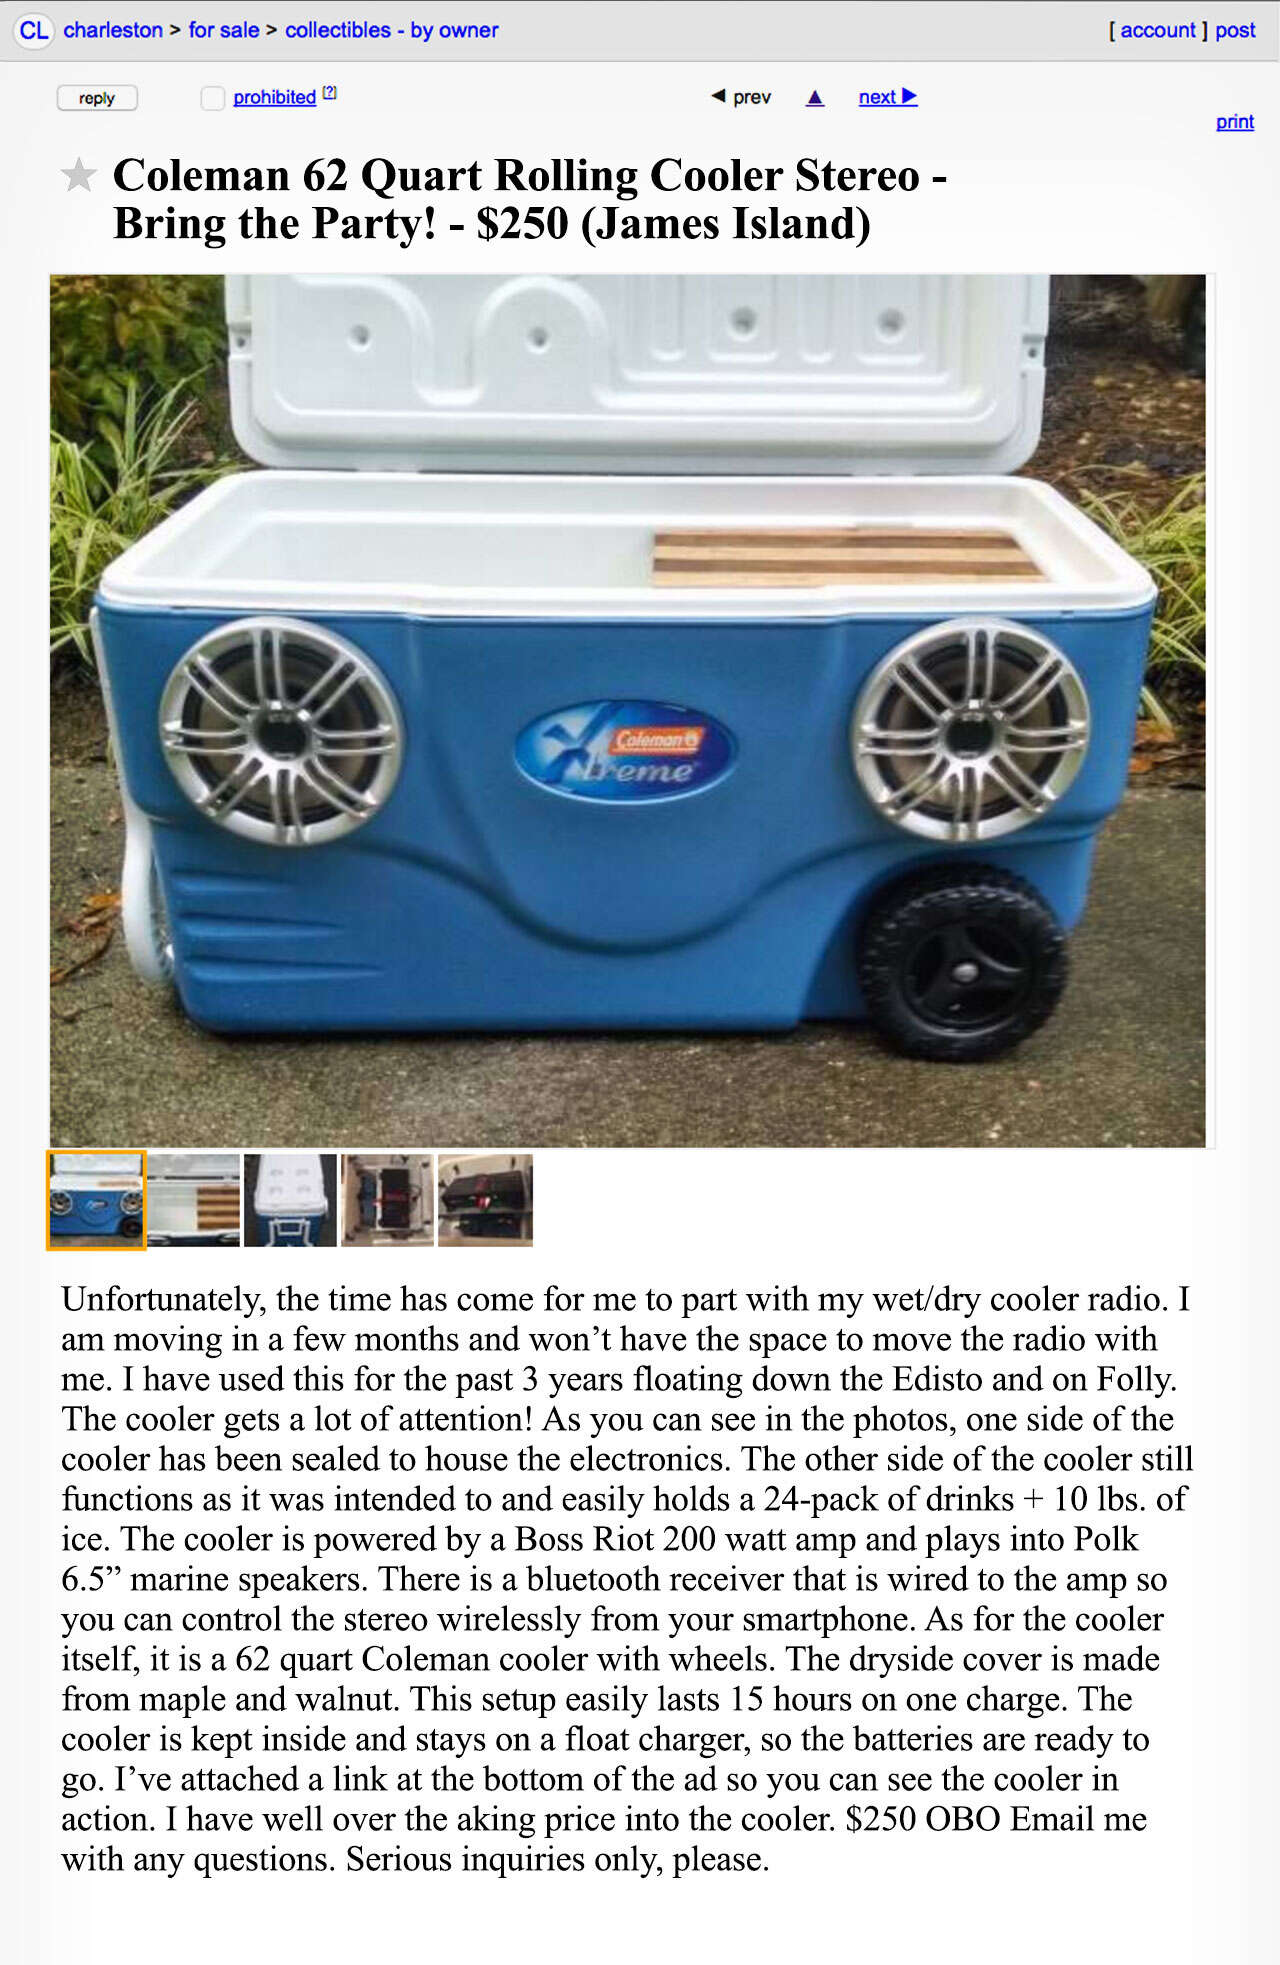 A Craigslist advertisement for a combo cooler/stereo. 